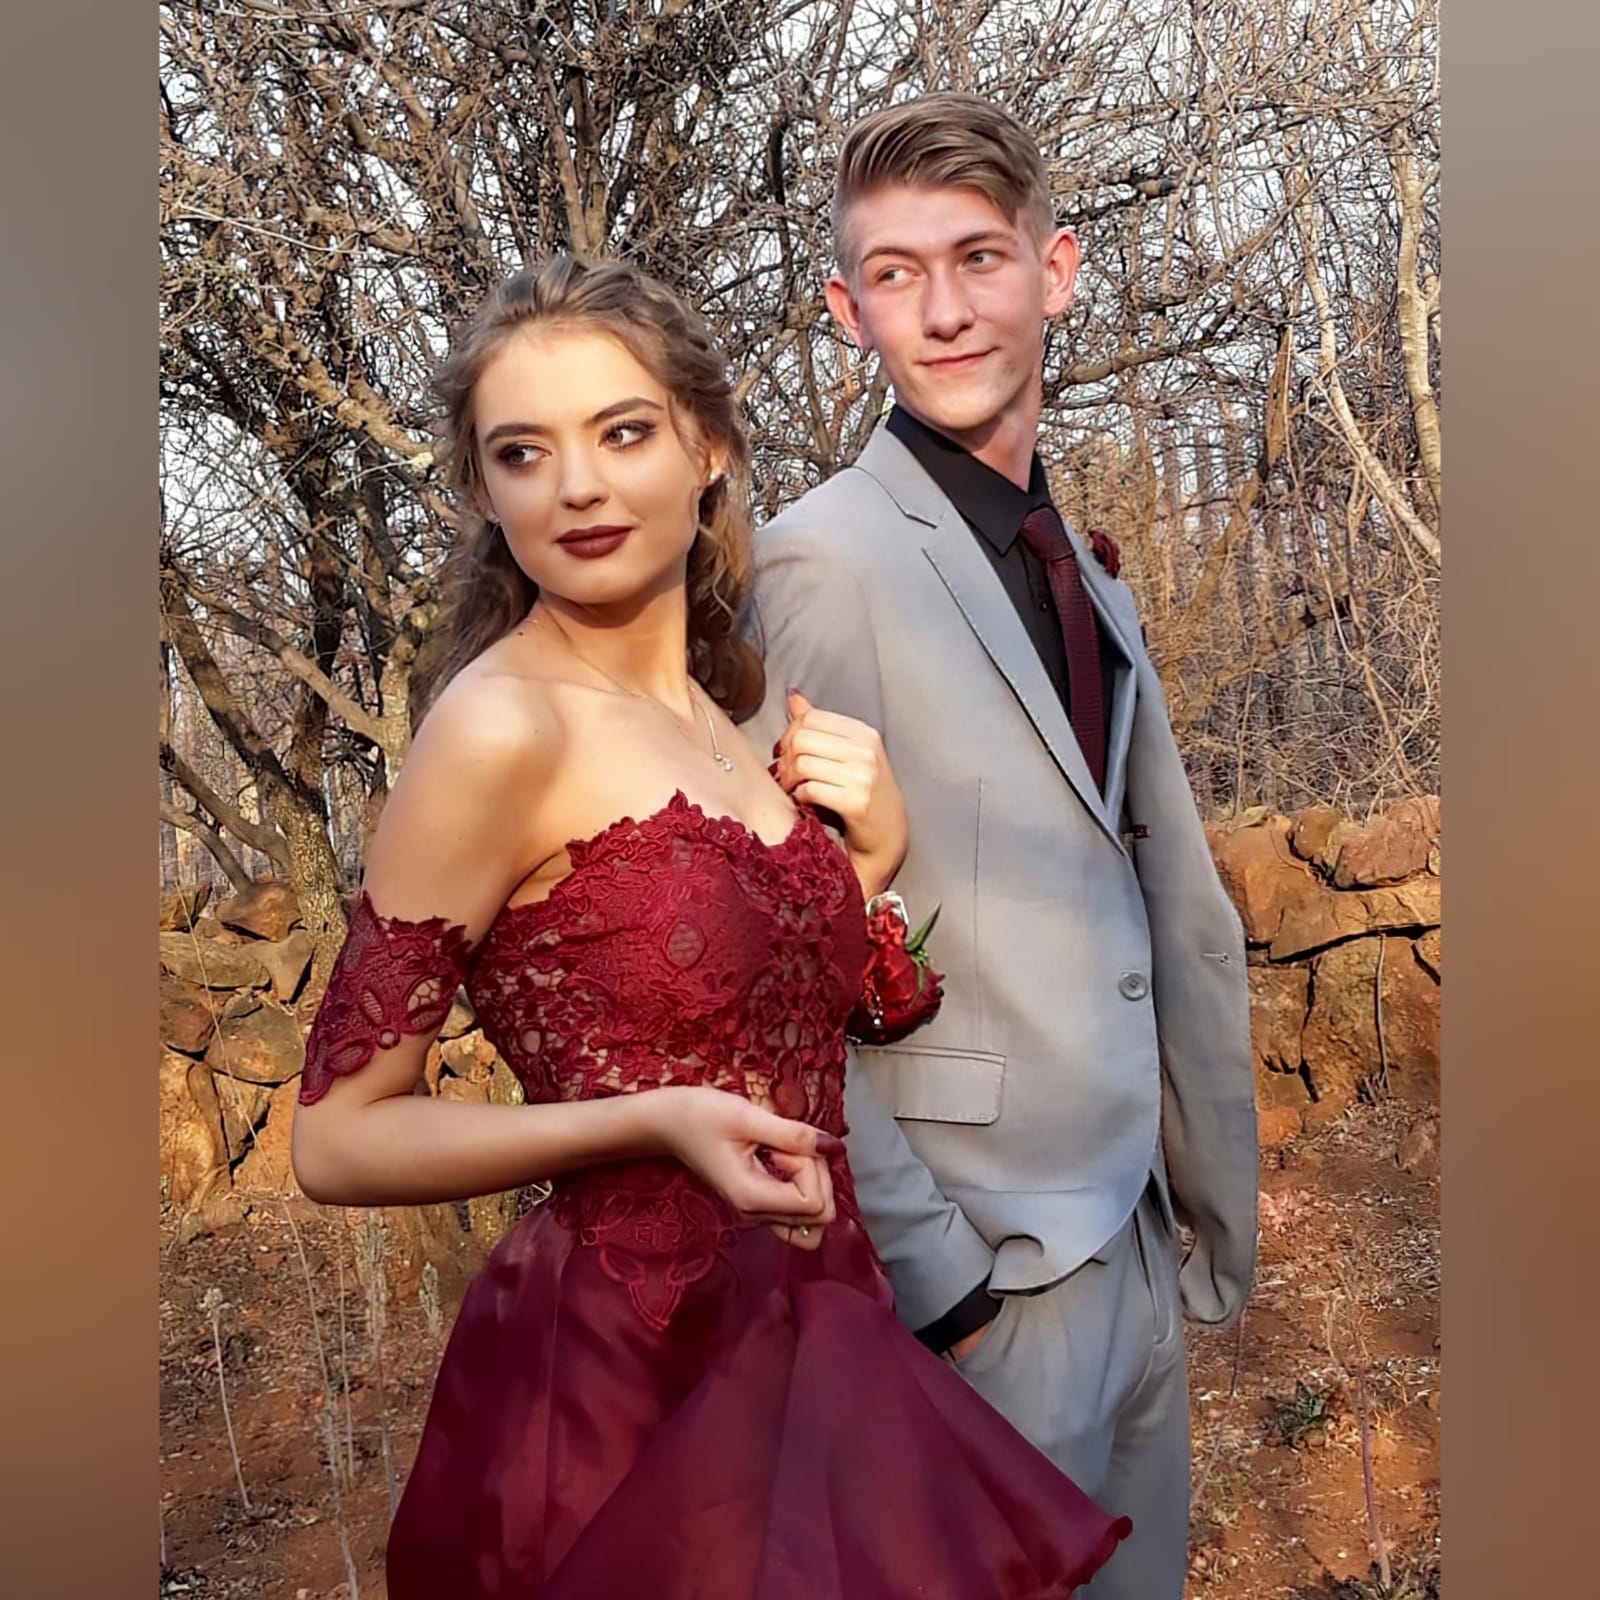 Dark red high low evening dress 3 the perfect dark red evening dress for your prom night if you want to look elegant yet adorable. With a lace bodice and a double layer hi - lo flowy bottom for a slight dramatic effect.